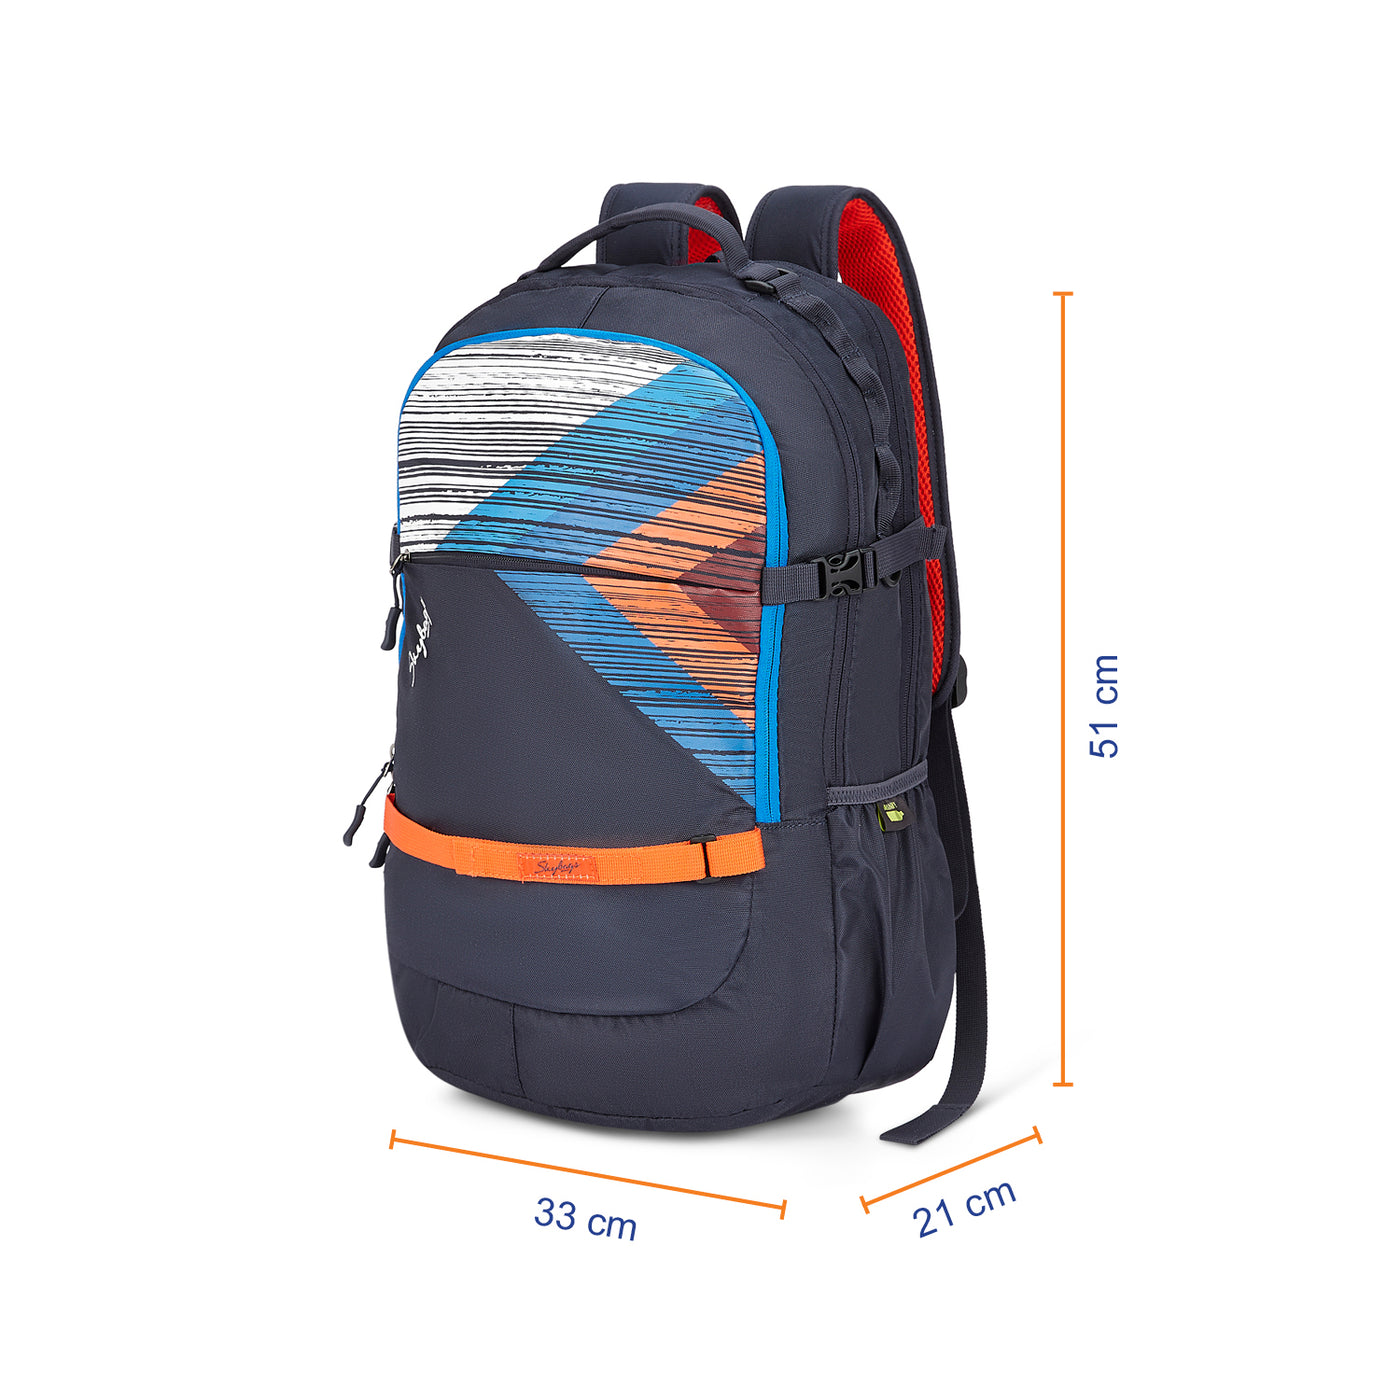 Skybags Cruze XL "College Laptop Backpack"